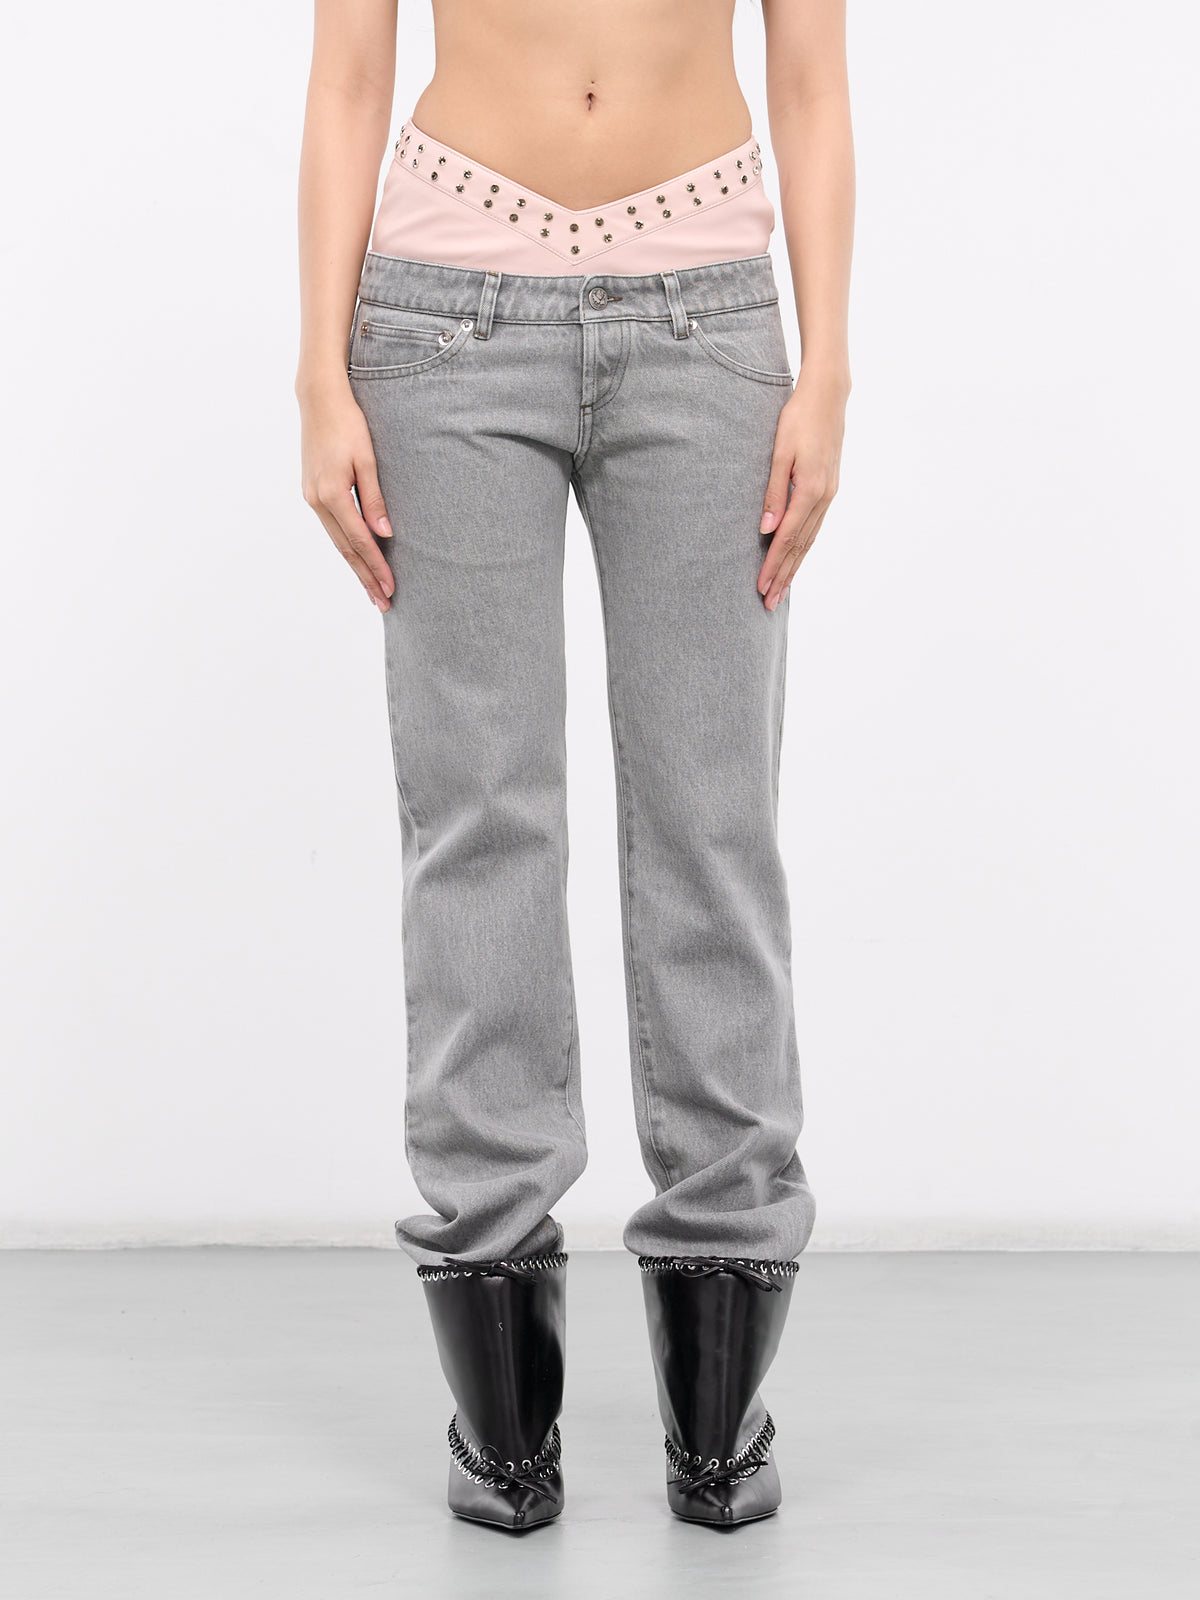 Double Layer Denim Jeans (P002-GREY-PINK)